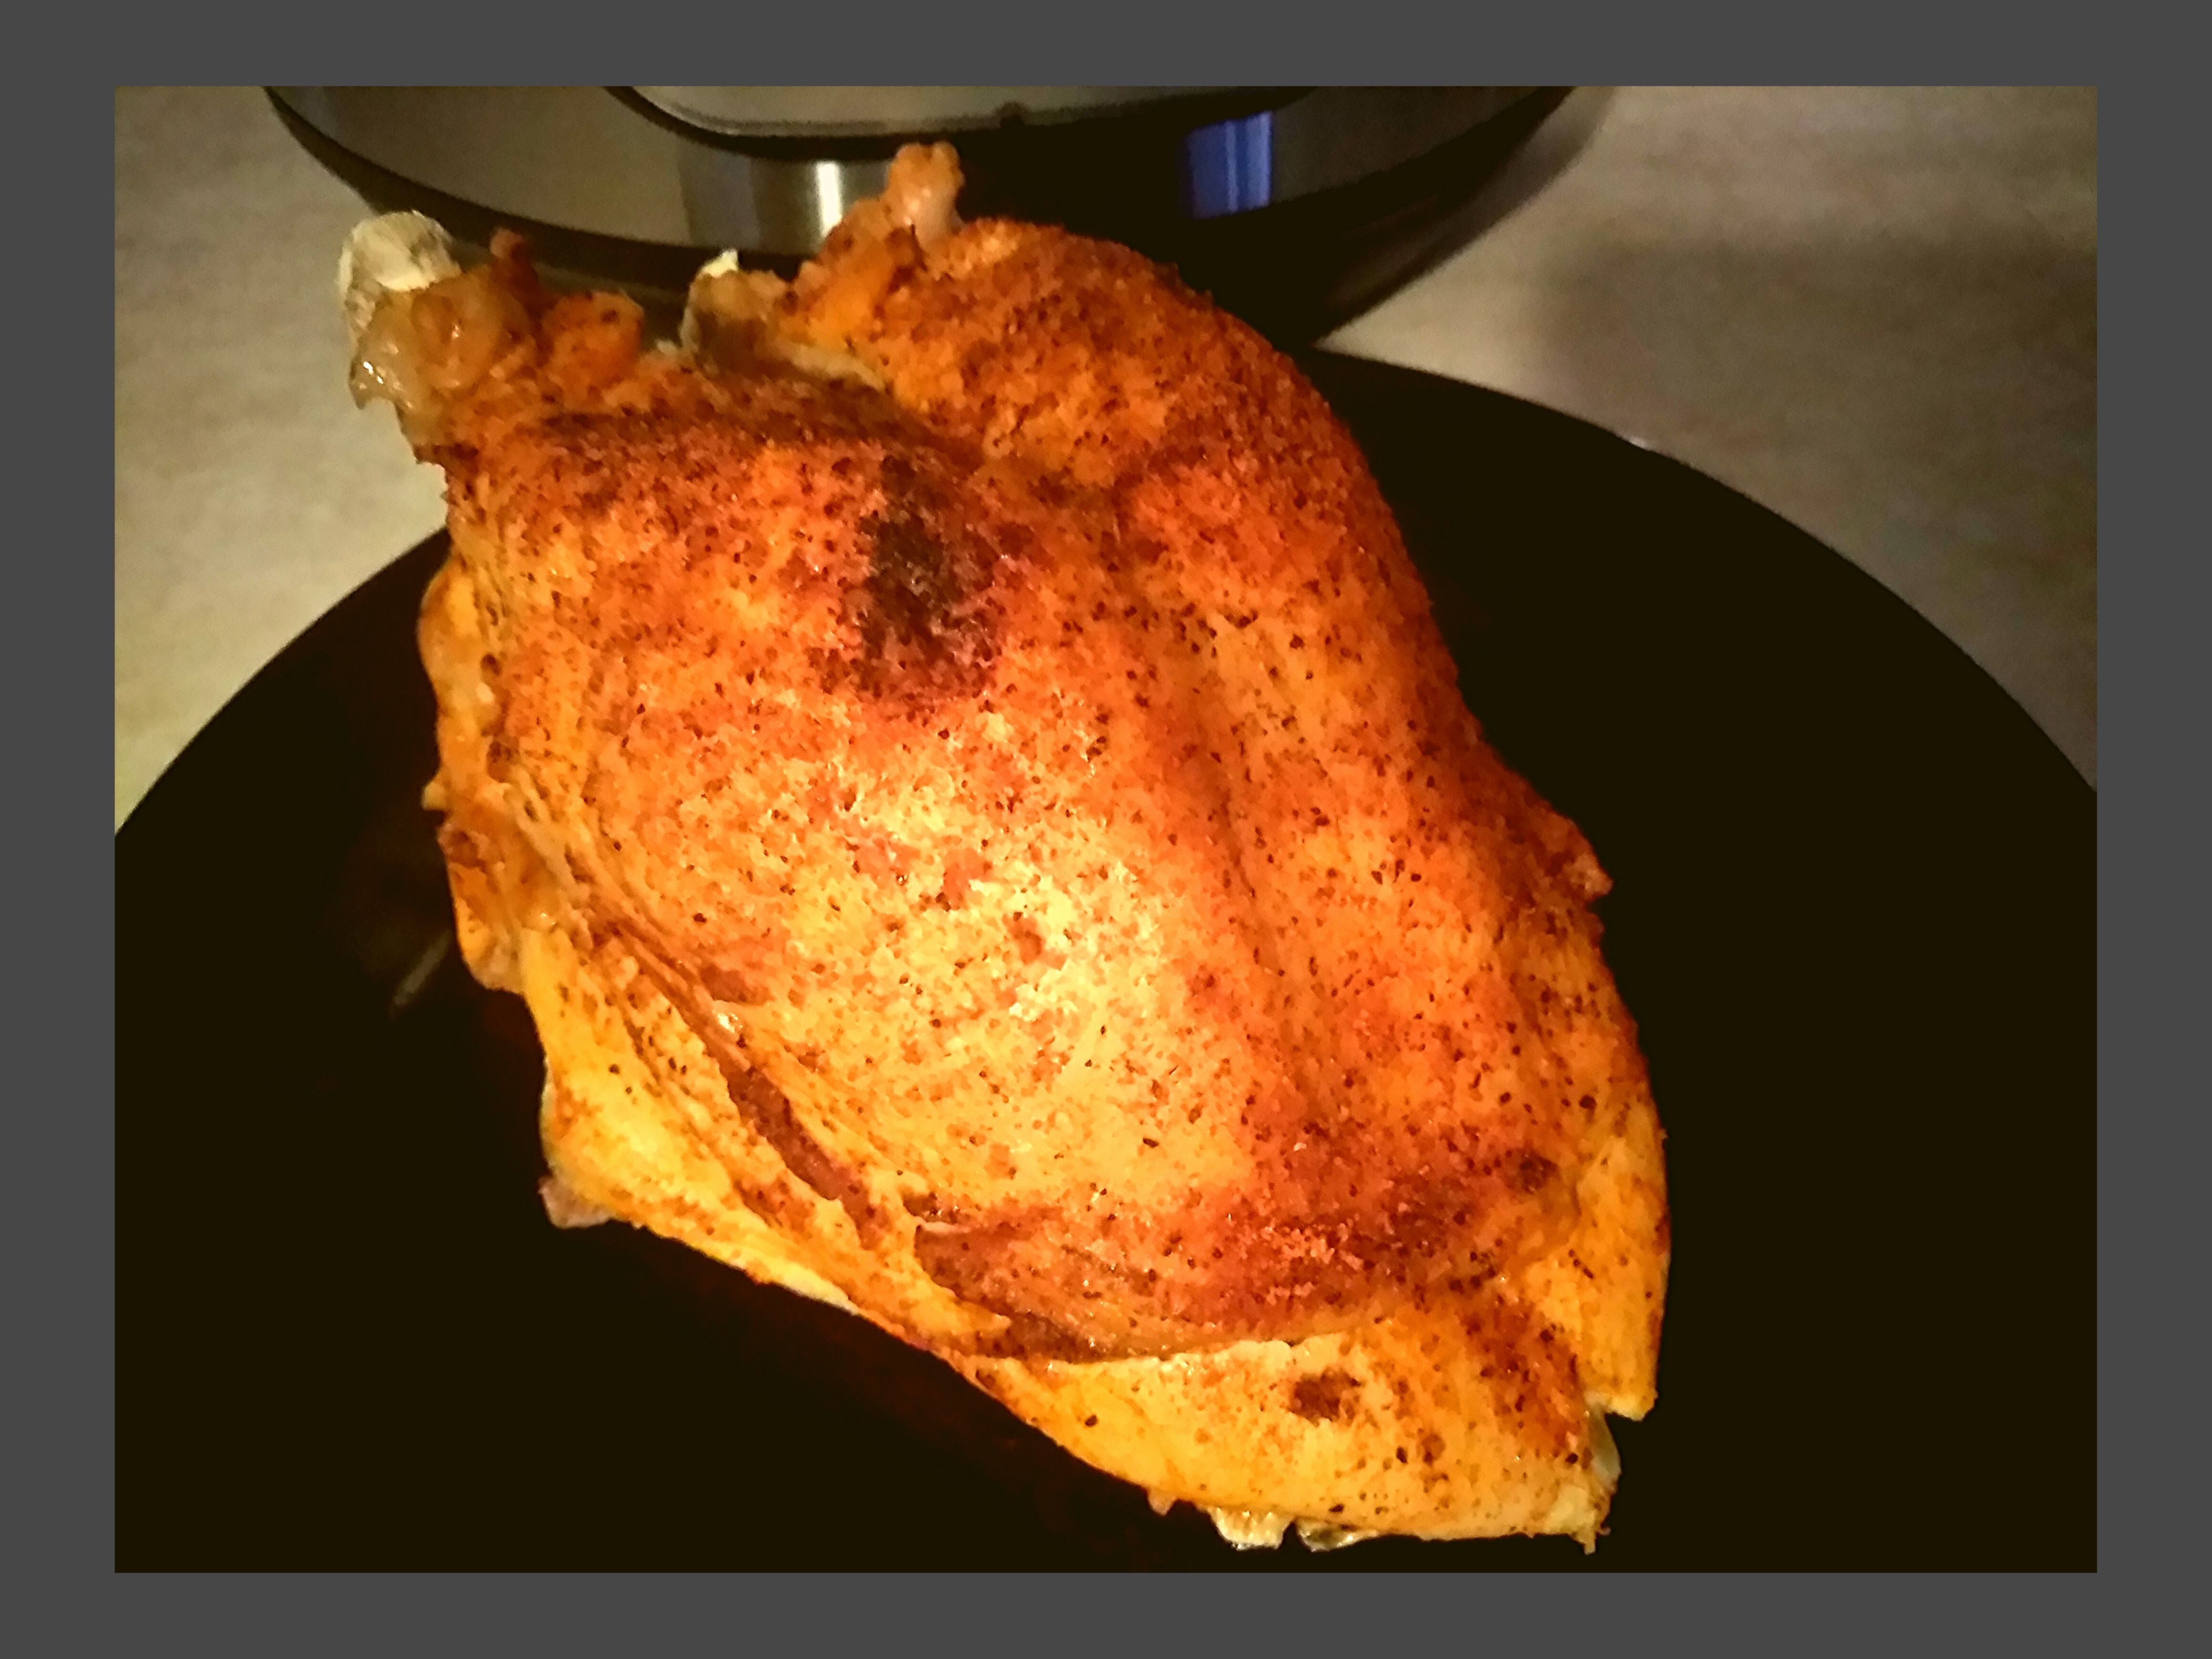 Turkey breast after broiling for 5 minutes to get crispy skin.